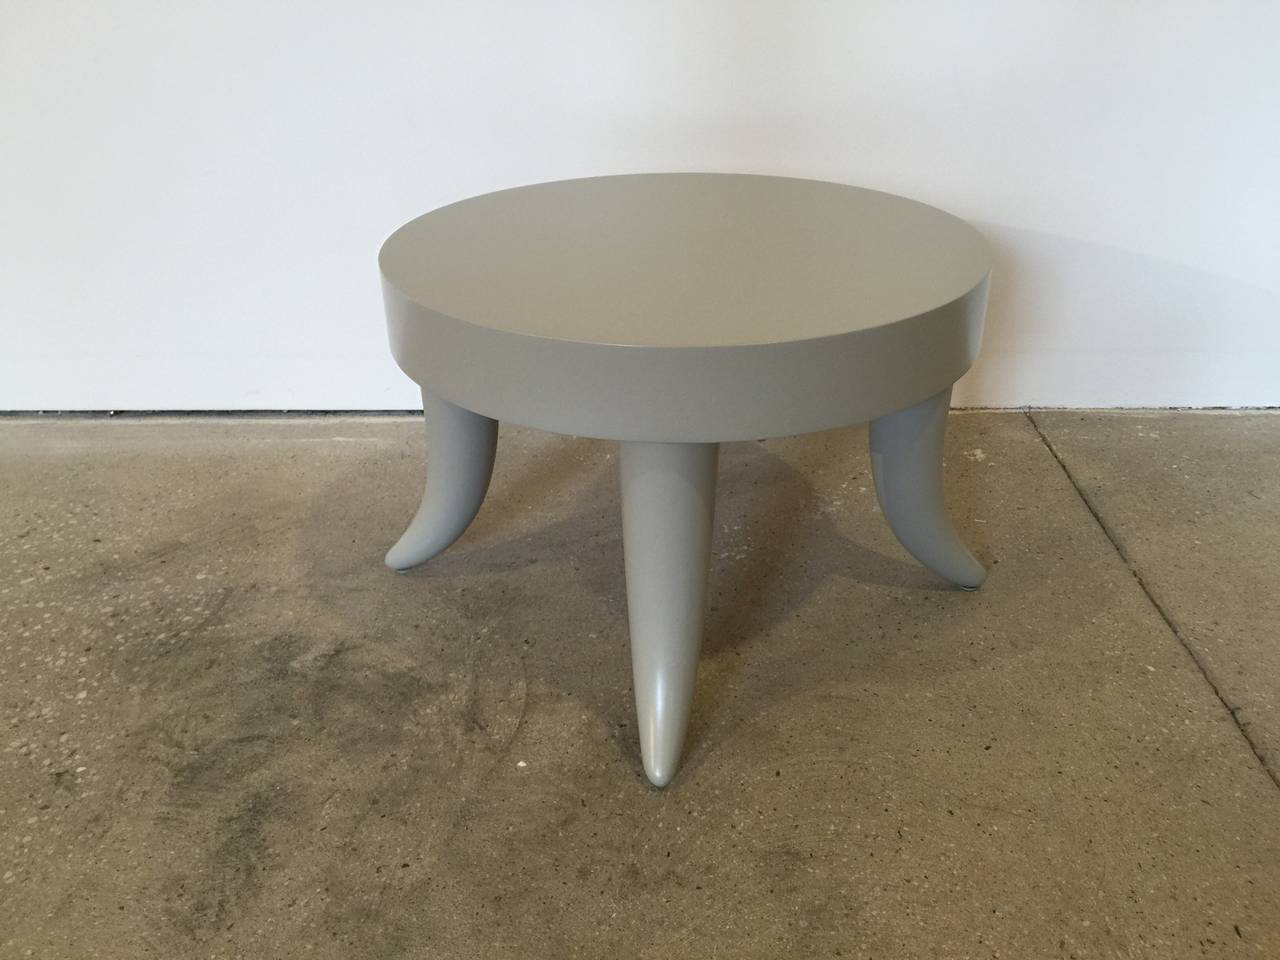 Tusk stool in custom grey satin lacquer finish, by Bill Sofield for Baker.   Signed with metal tags.  Crafted of maple solids.  USA, circa 1990.  May be viewed at the 1stdibs showroom at the New York Design Center.